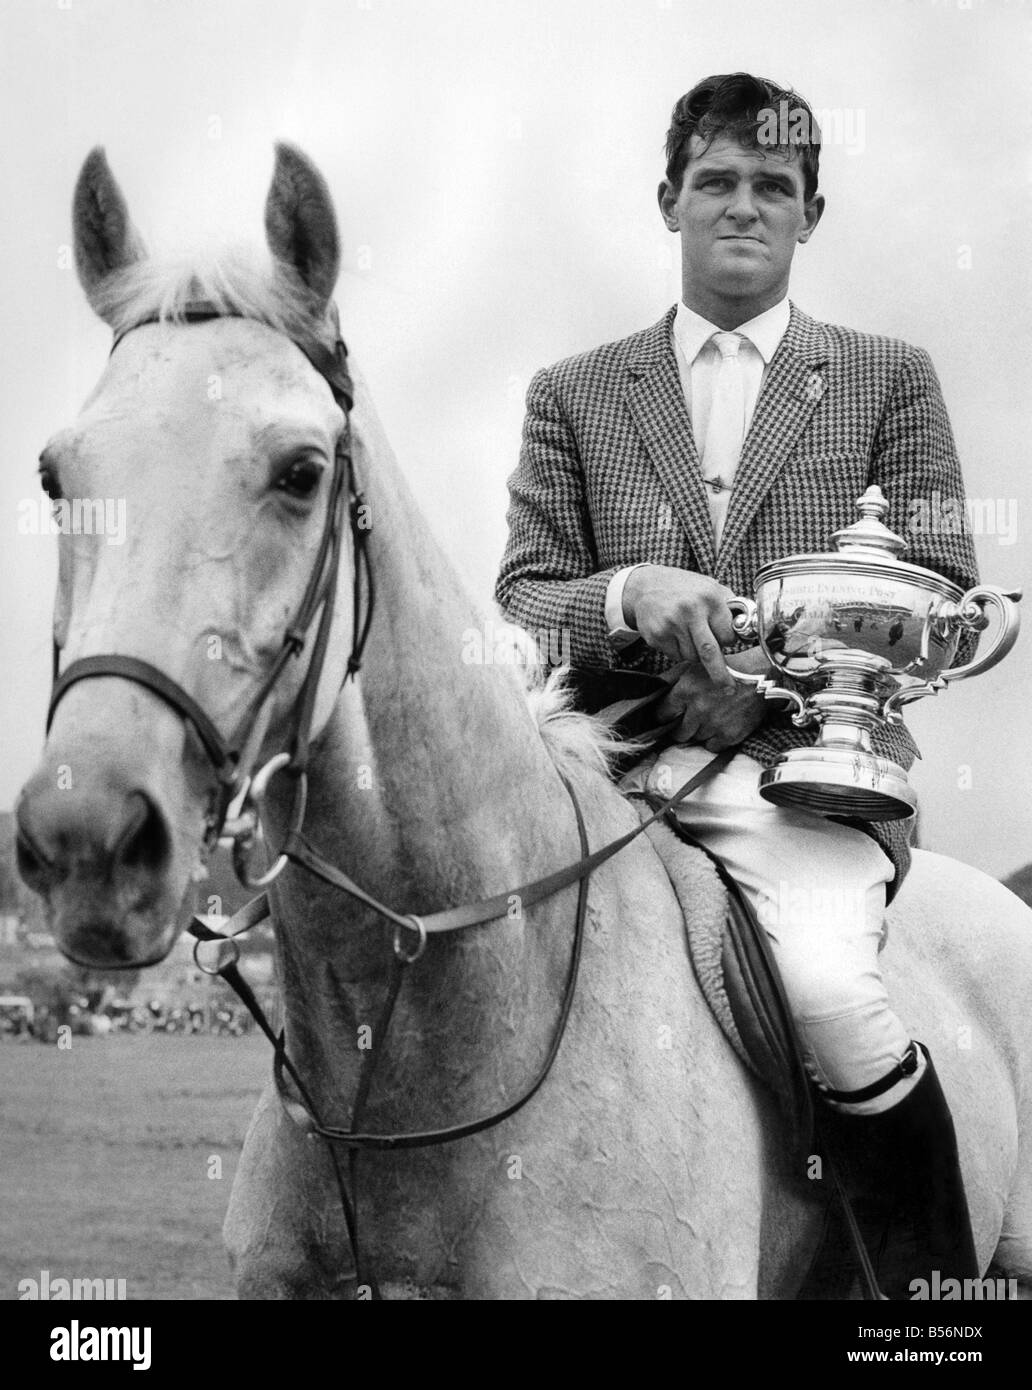 Mr. Harvey Smith, of York, pictured with trophy after winning the Lancashire Area International Trial event in 60 3/5 secs. July 1963 P009723 Stock Photo